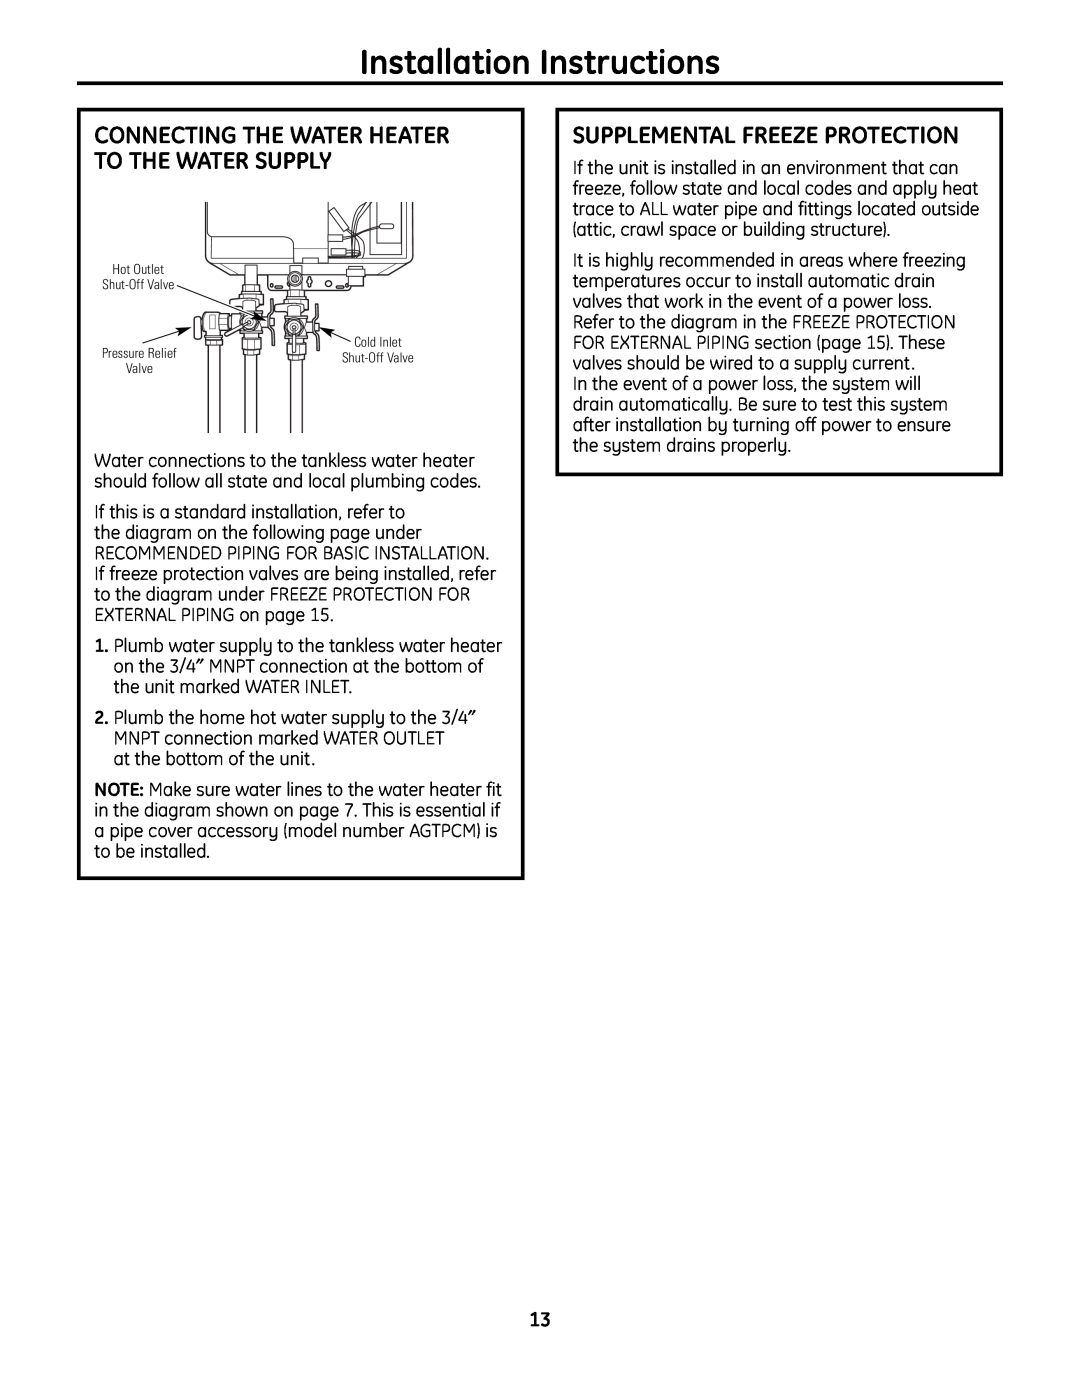 GE GN94ENSRSA Supplemental Freeze Protection, Connecting The Water Heater To The Water Supply, Installation Instructions 